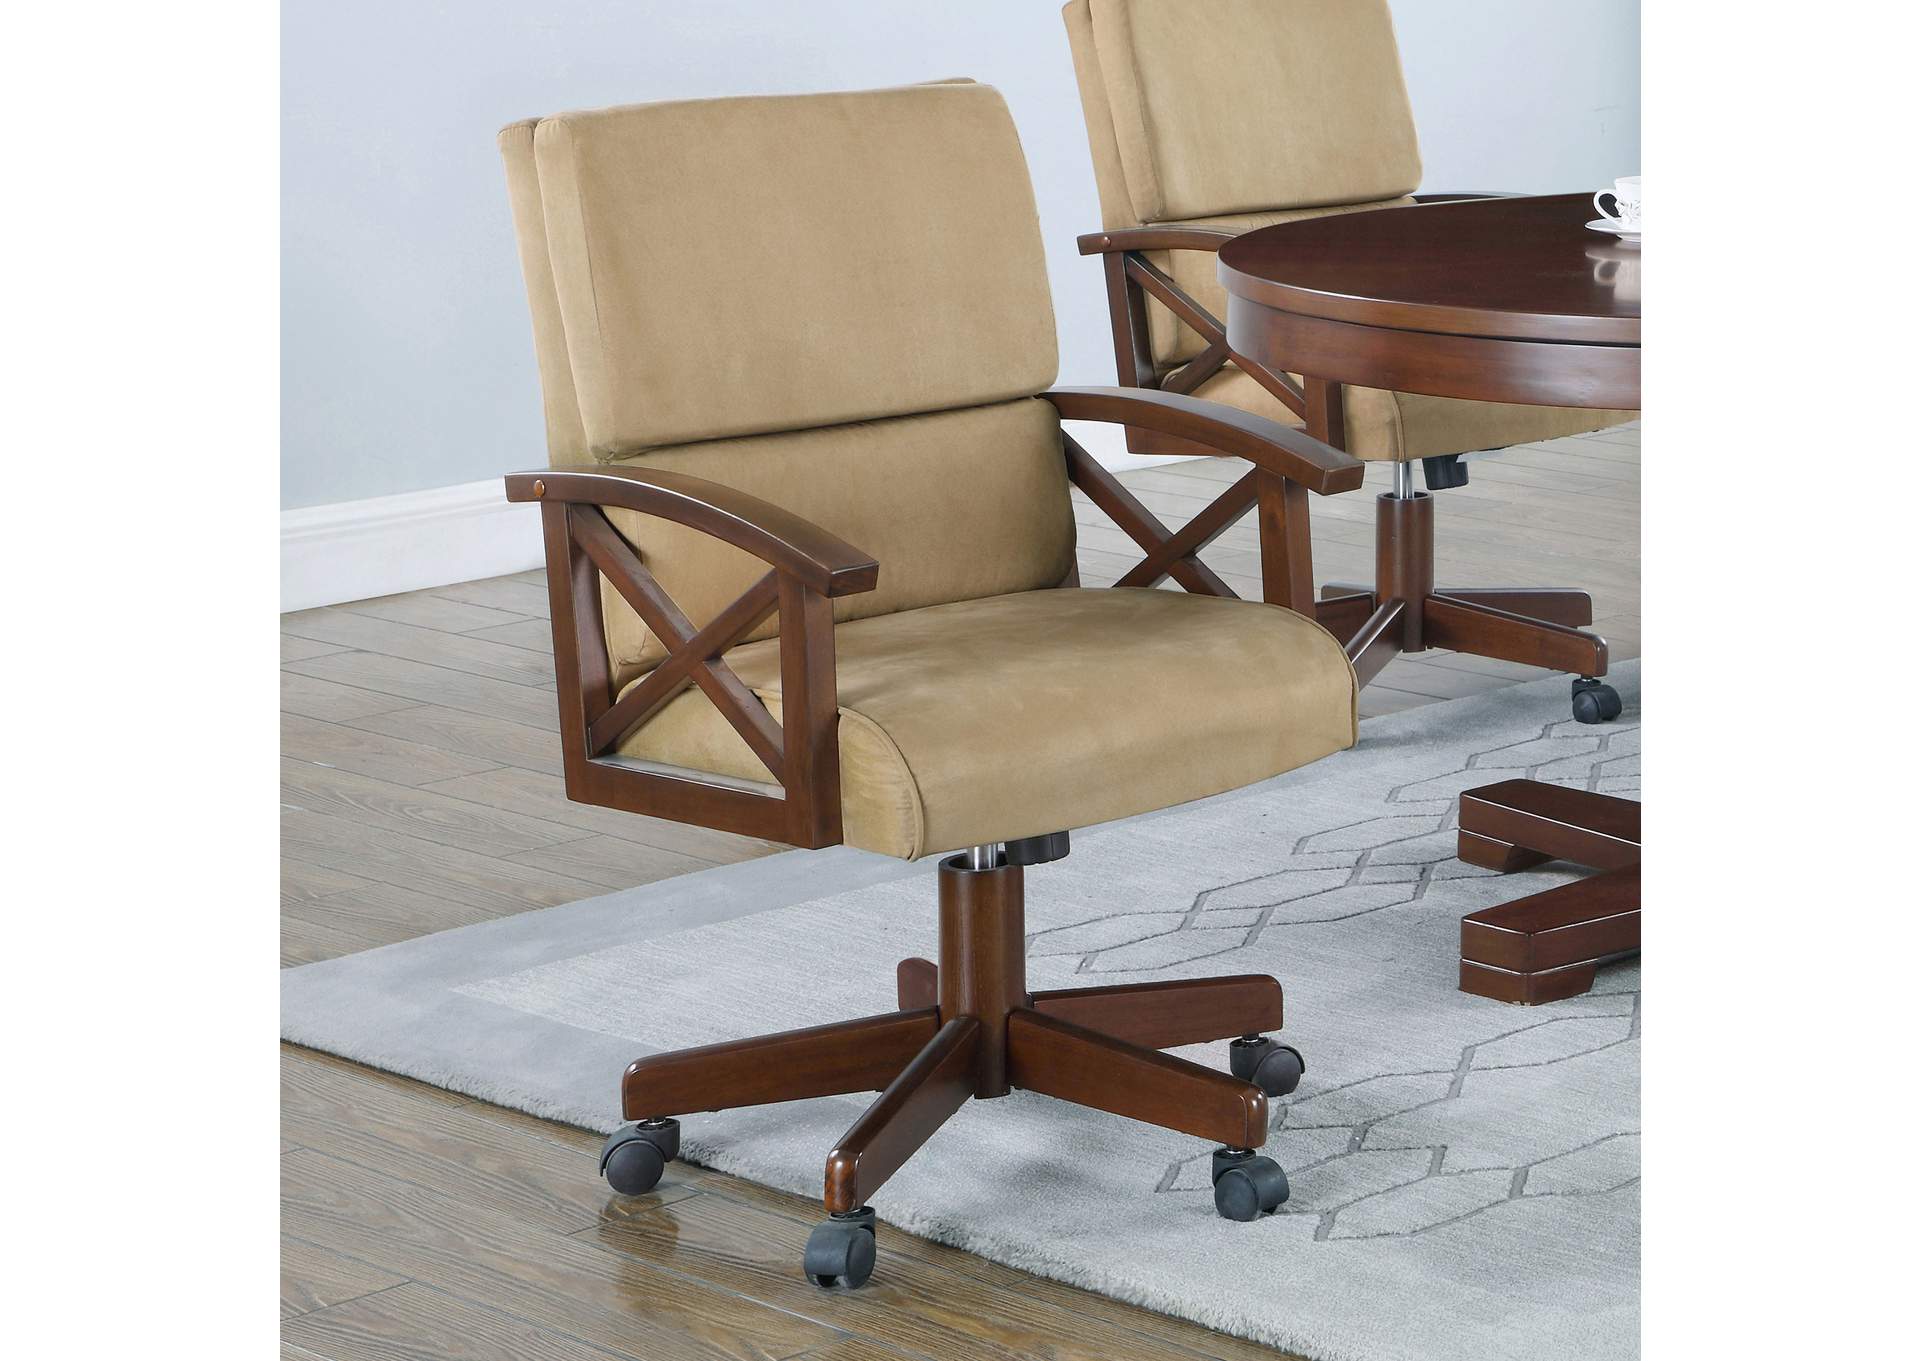 Marietta Upholstered Game Chair Tobacco and Tan,Coaster Furniture